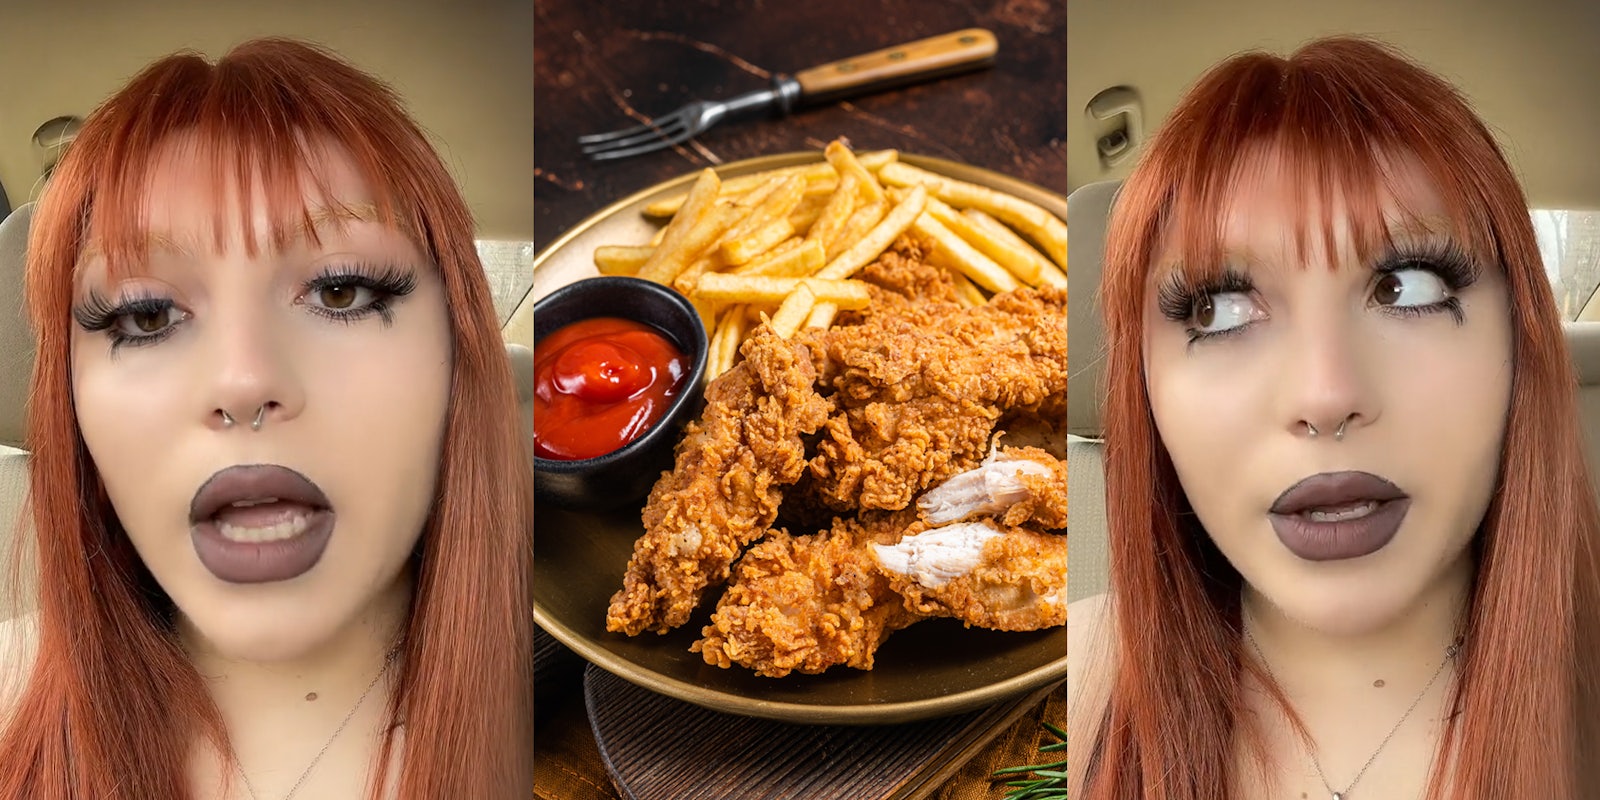 server speaking in car (l) chicken tenders and french fries on plate on table (c) server speaking in car looking left (r)